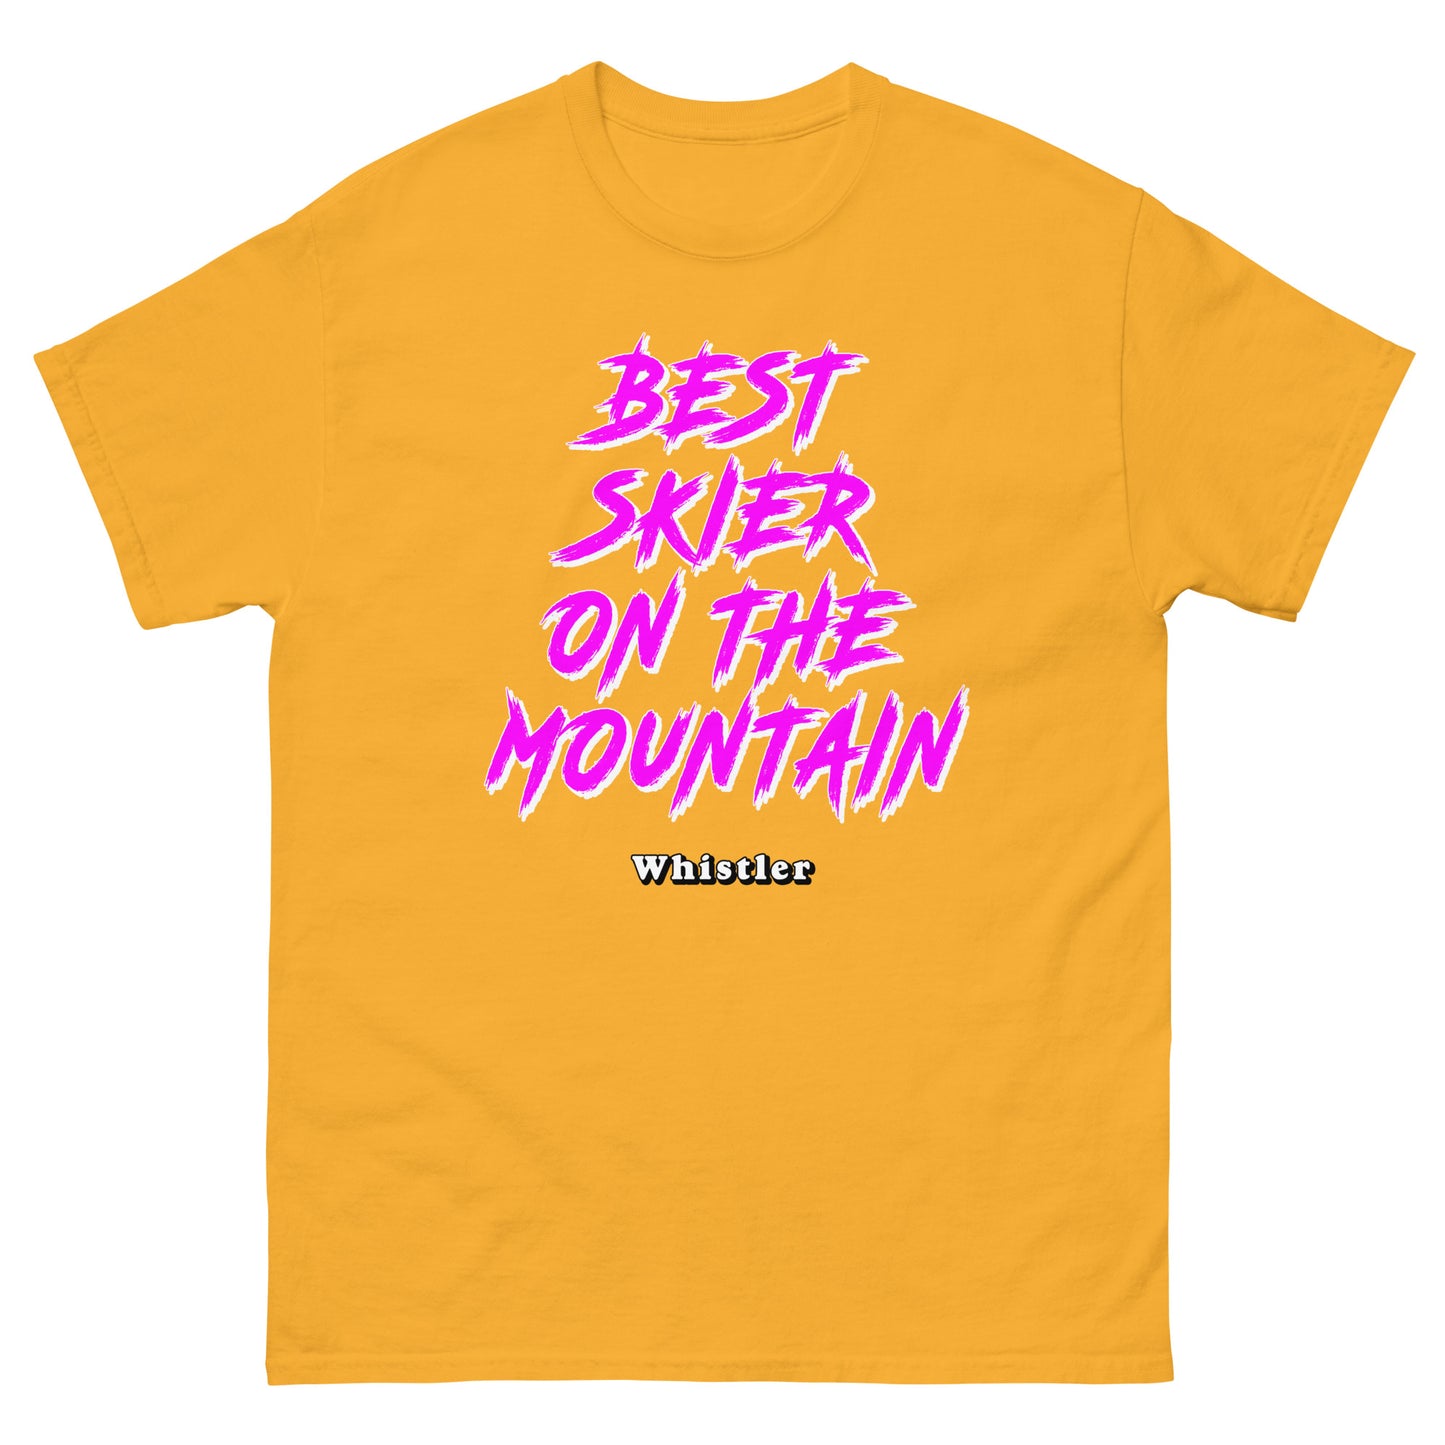 Best Skier on the Mountain T-shirt